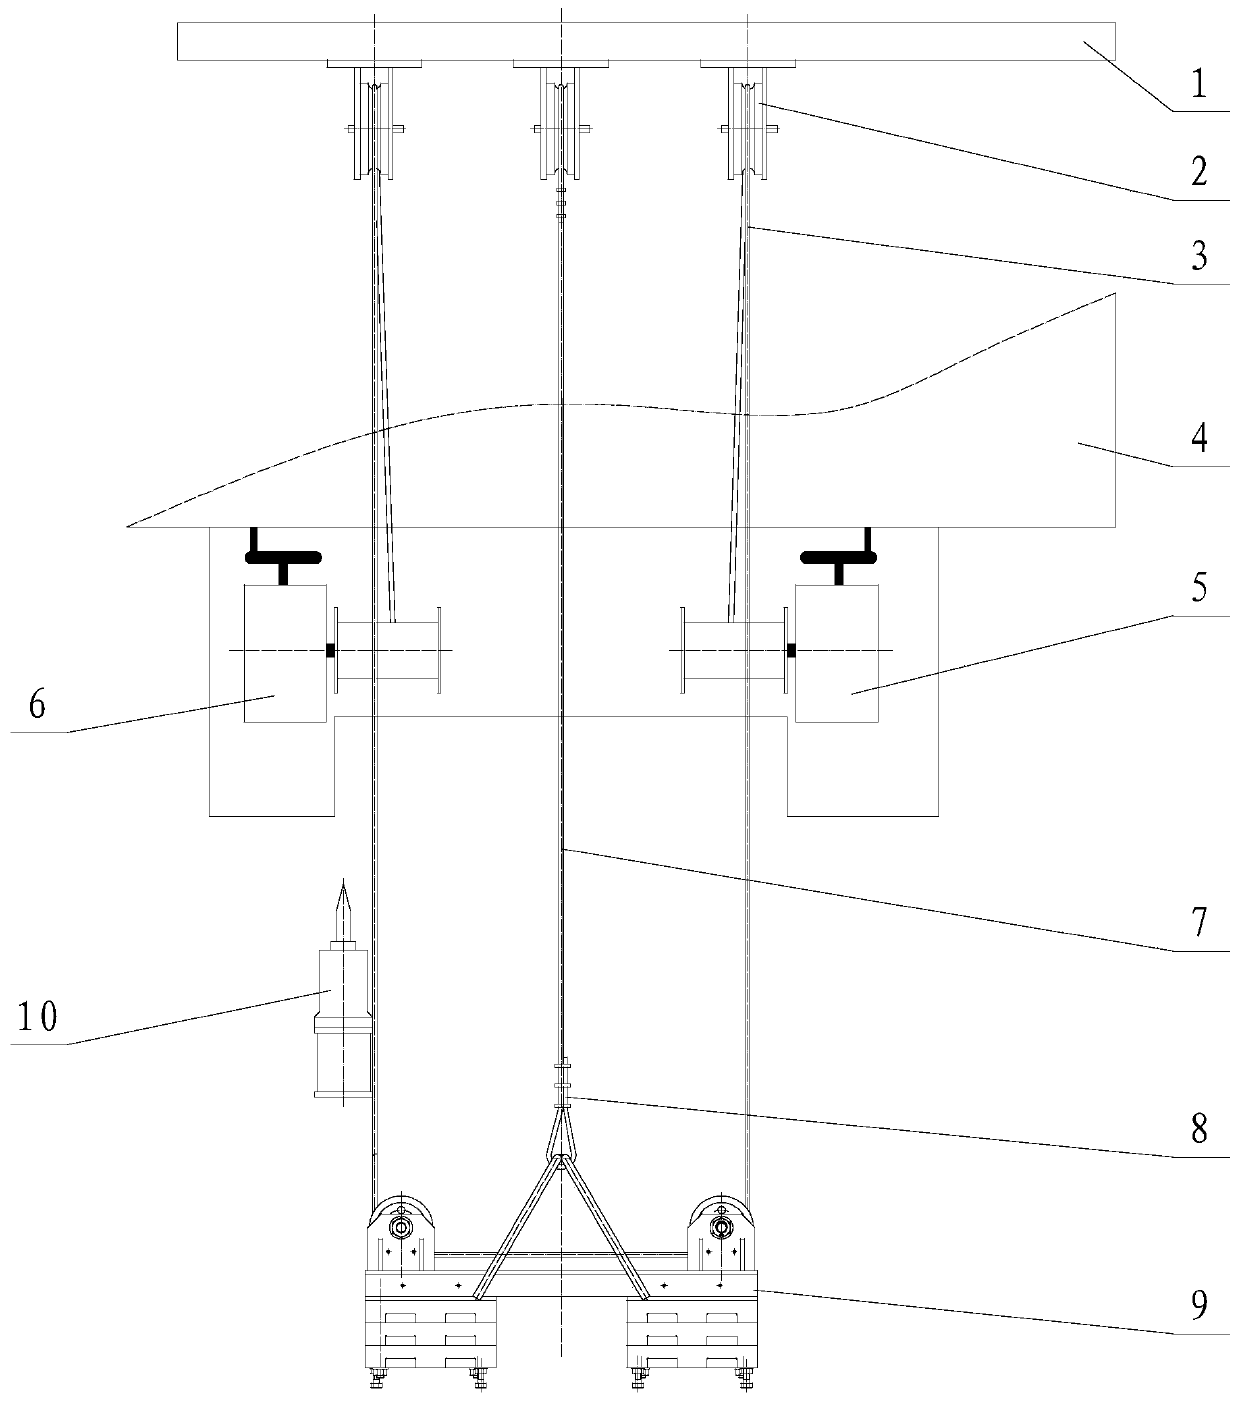 Double winch marine hydrological observation system and method based on offshore oil platform